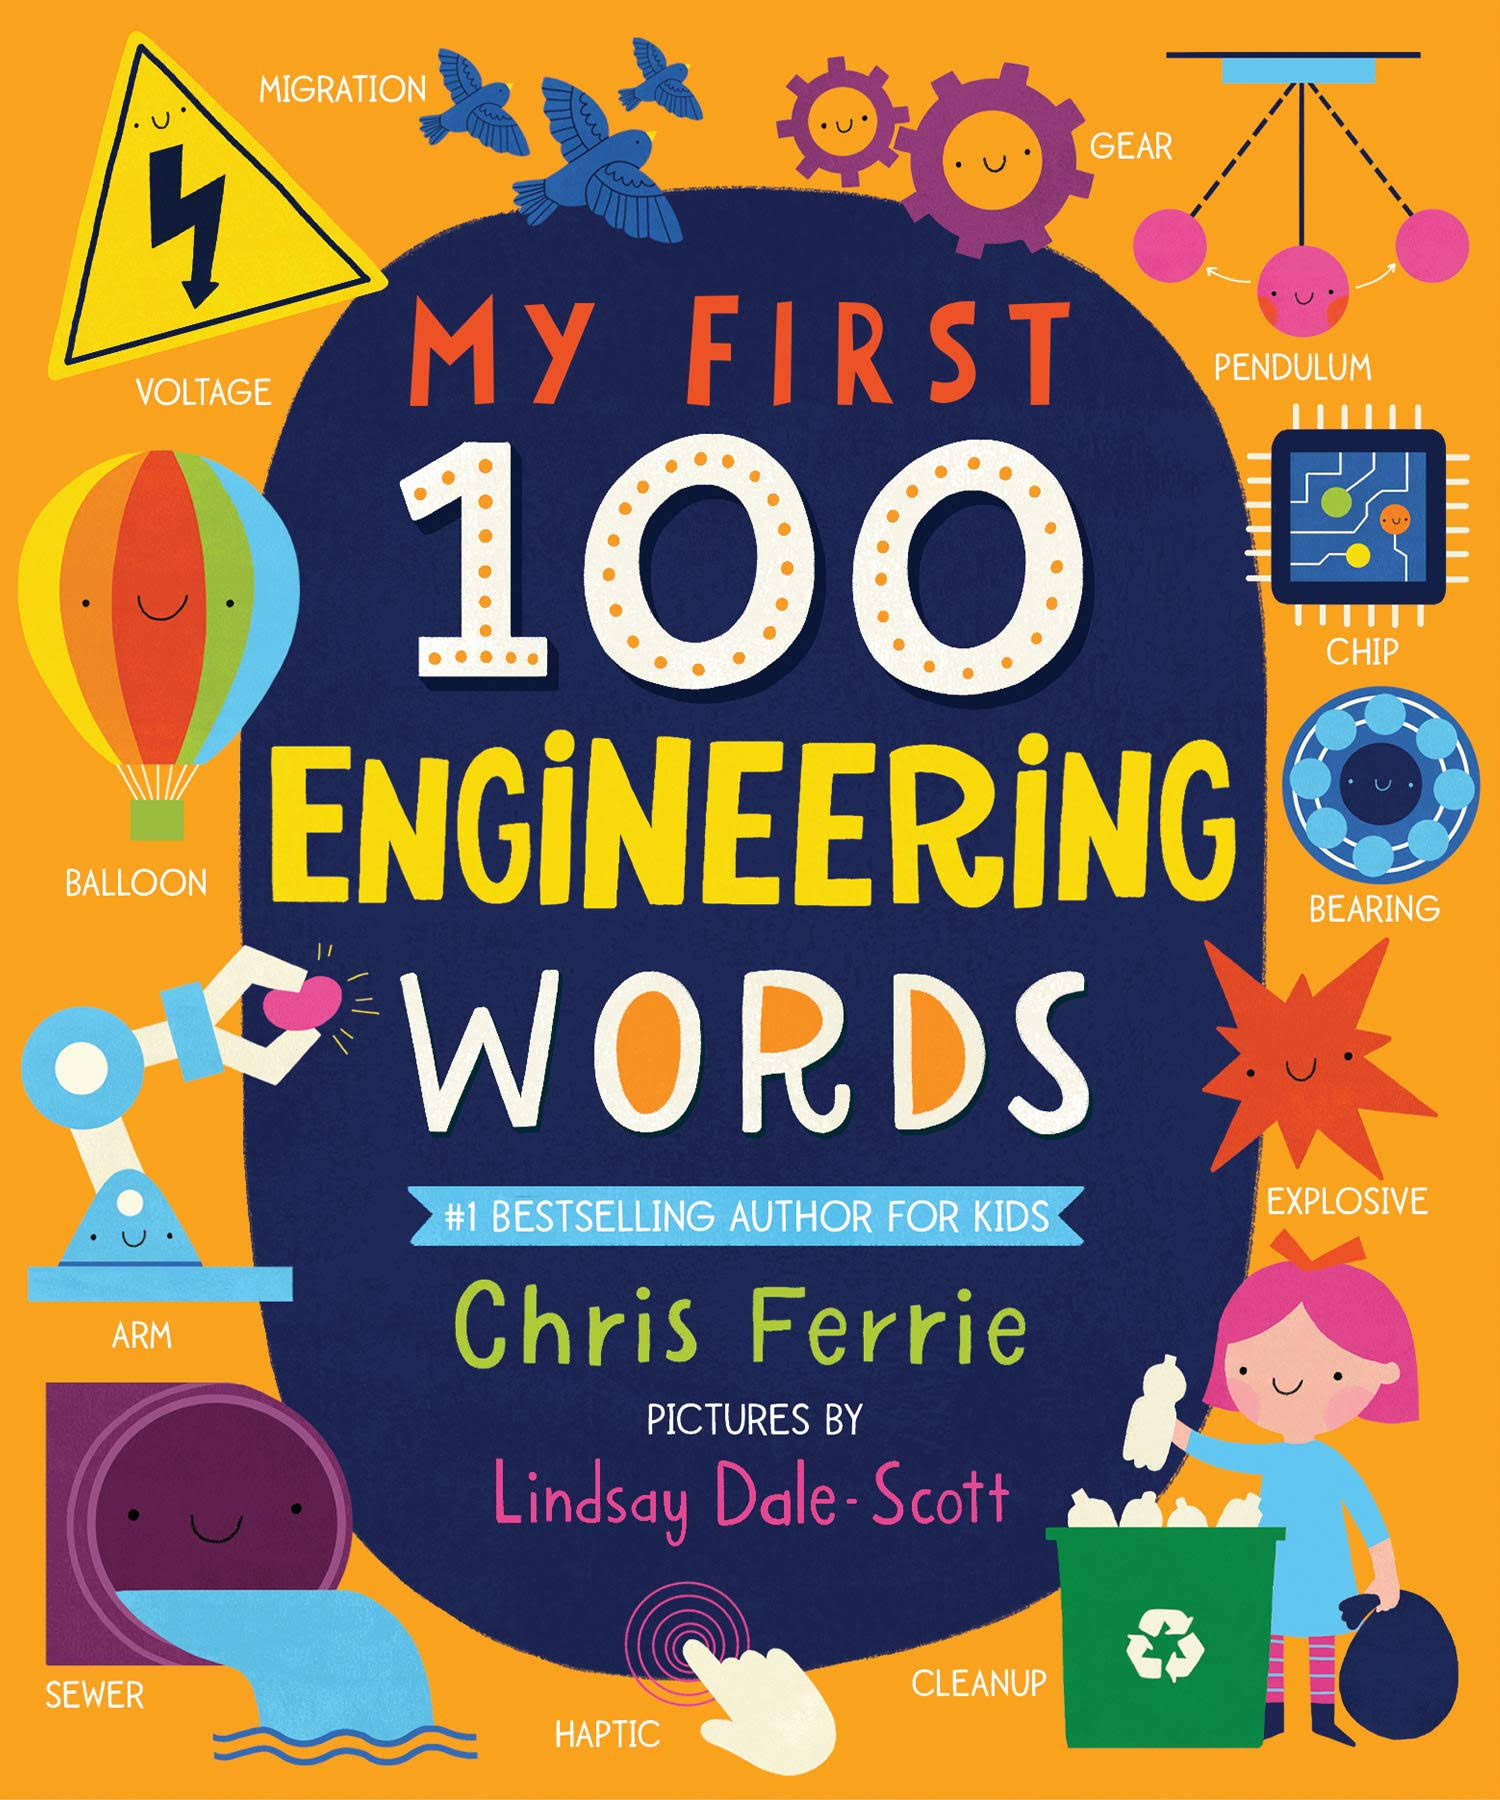 My First 100 Engineering Words by Chris Ferrie